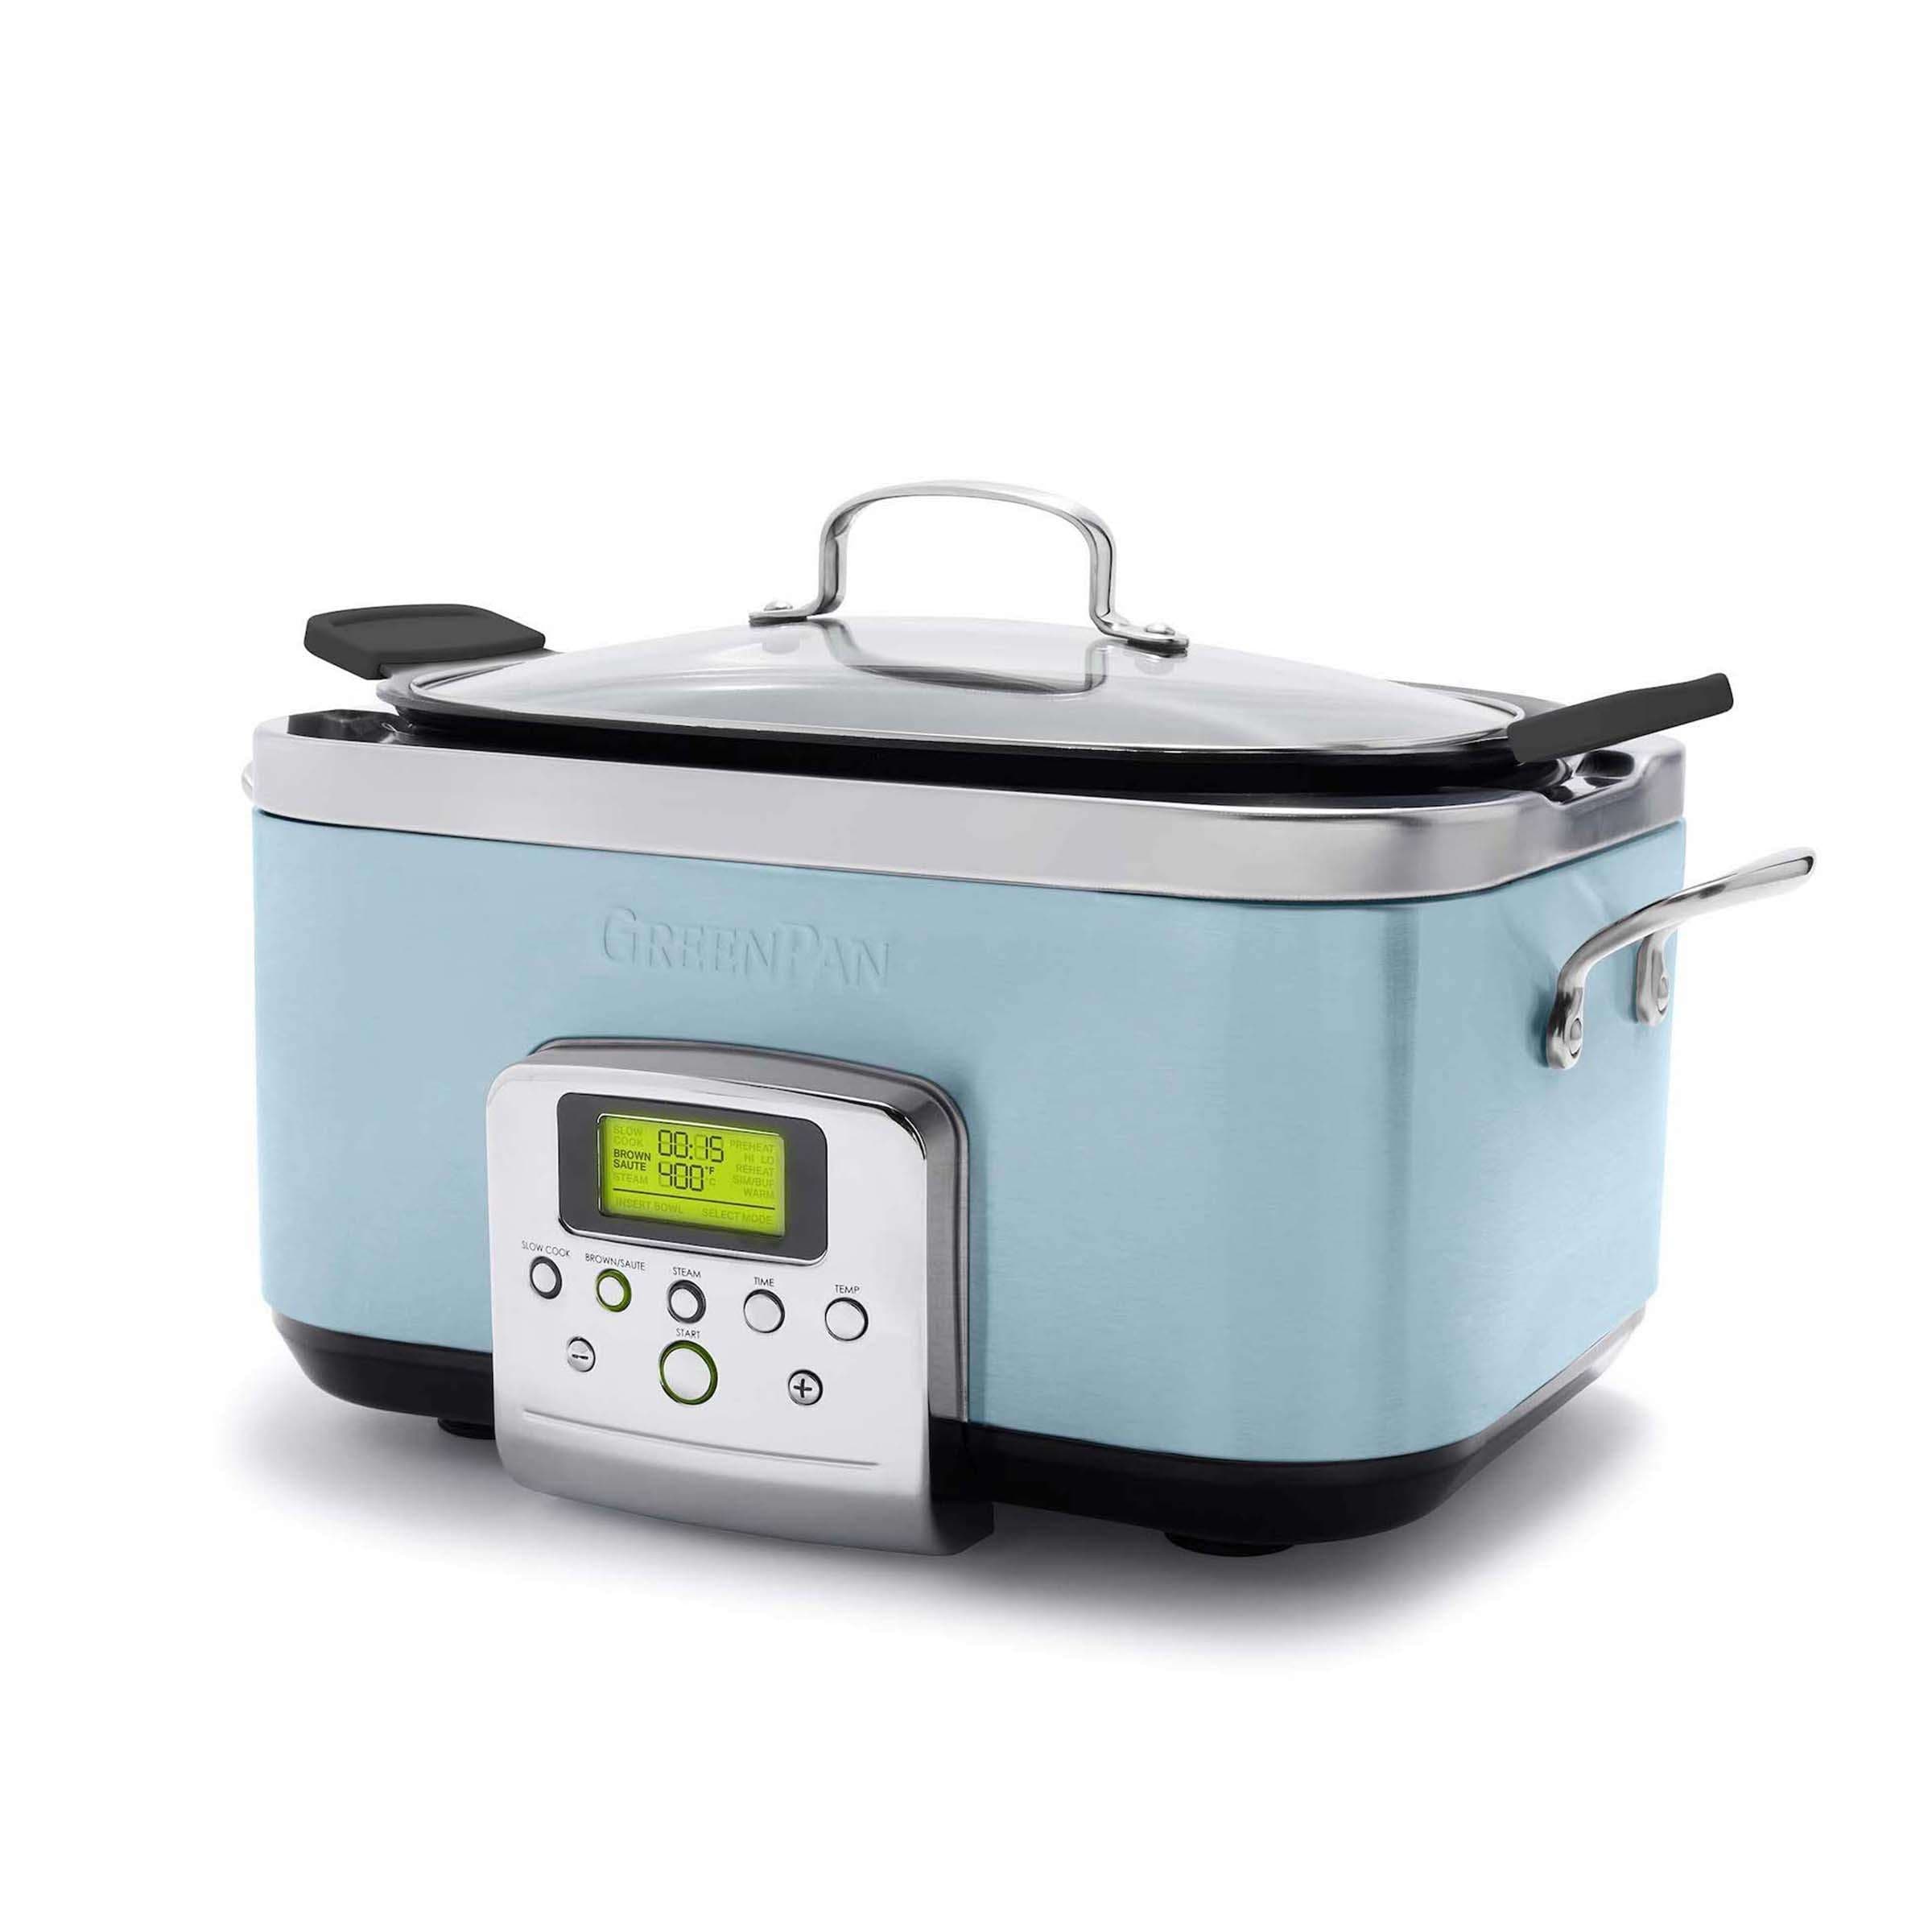 The Presto Nomad Slow Cooker - The Amazing Slow Cooker That's